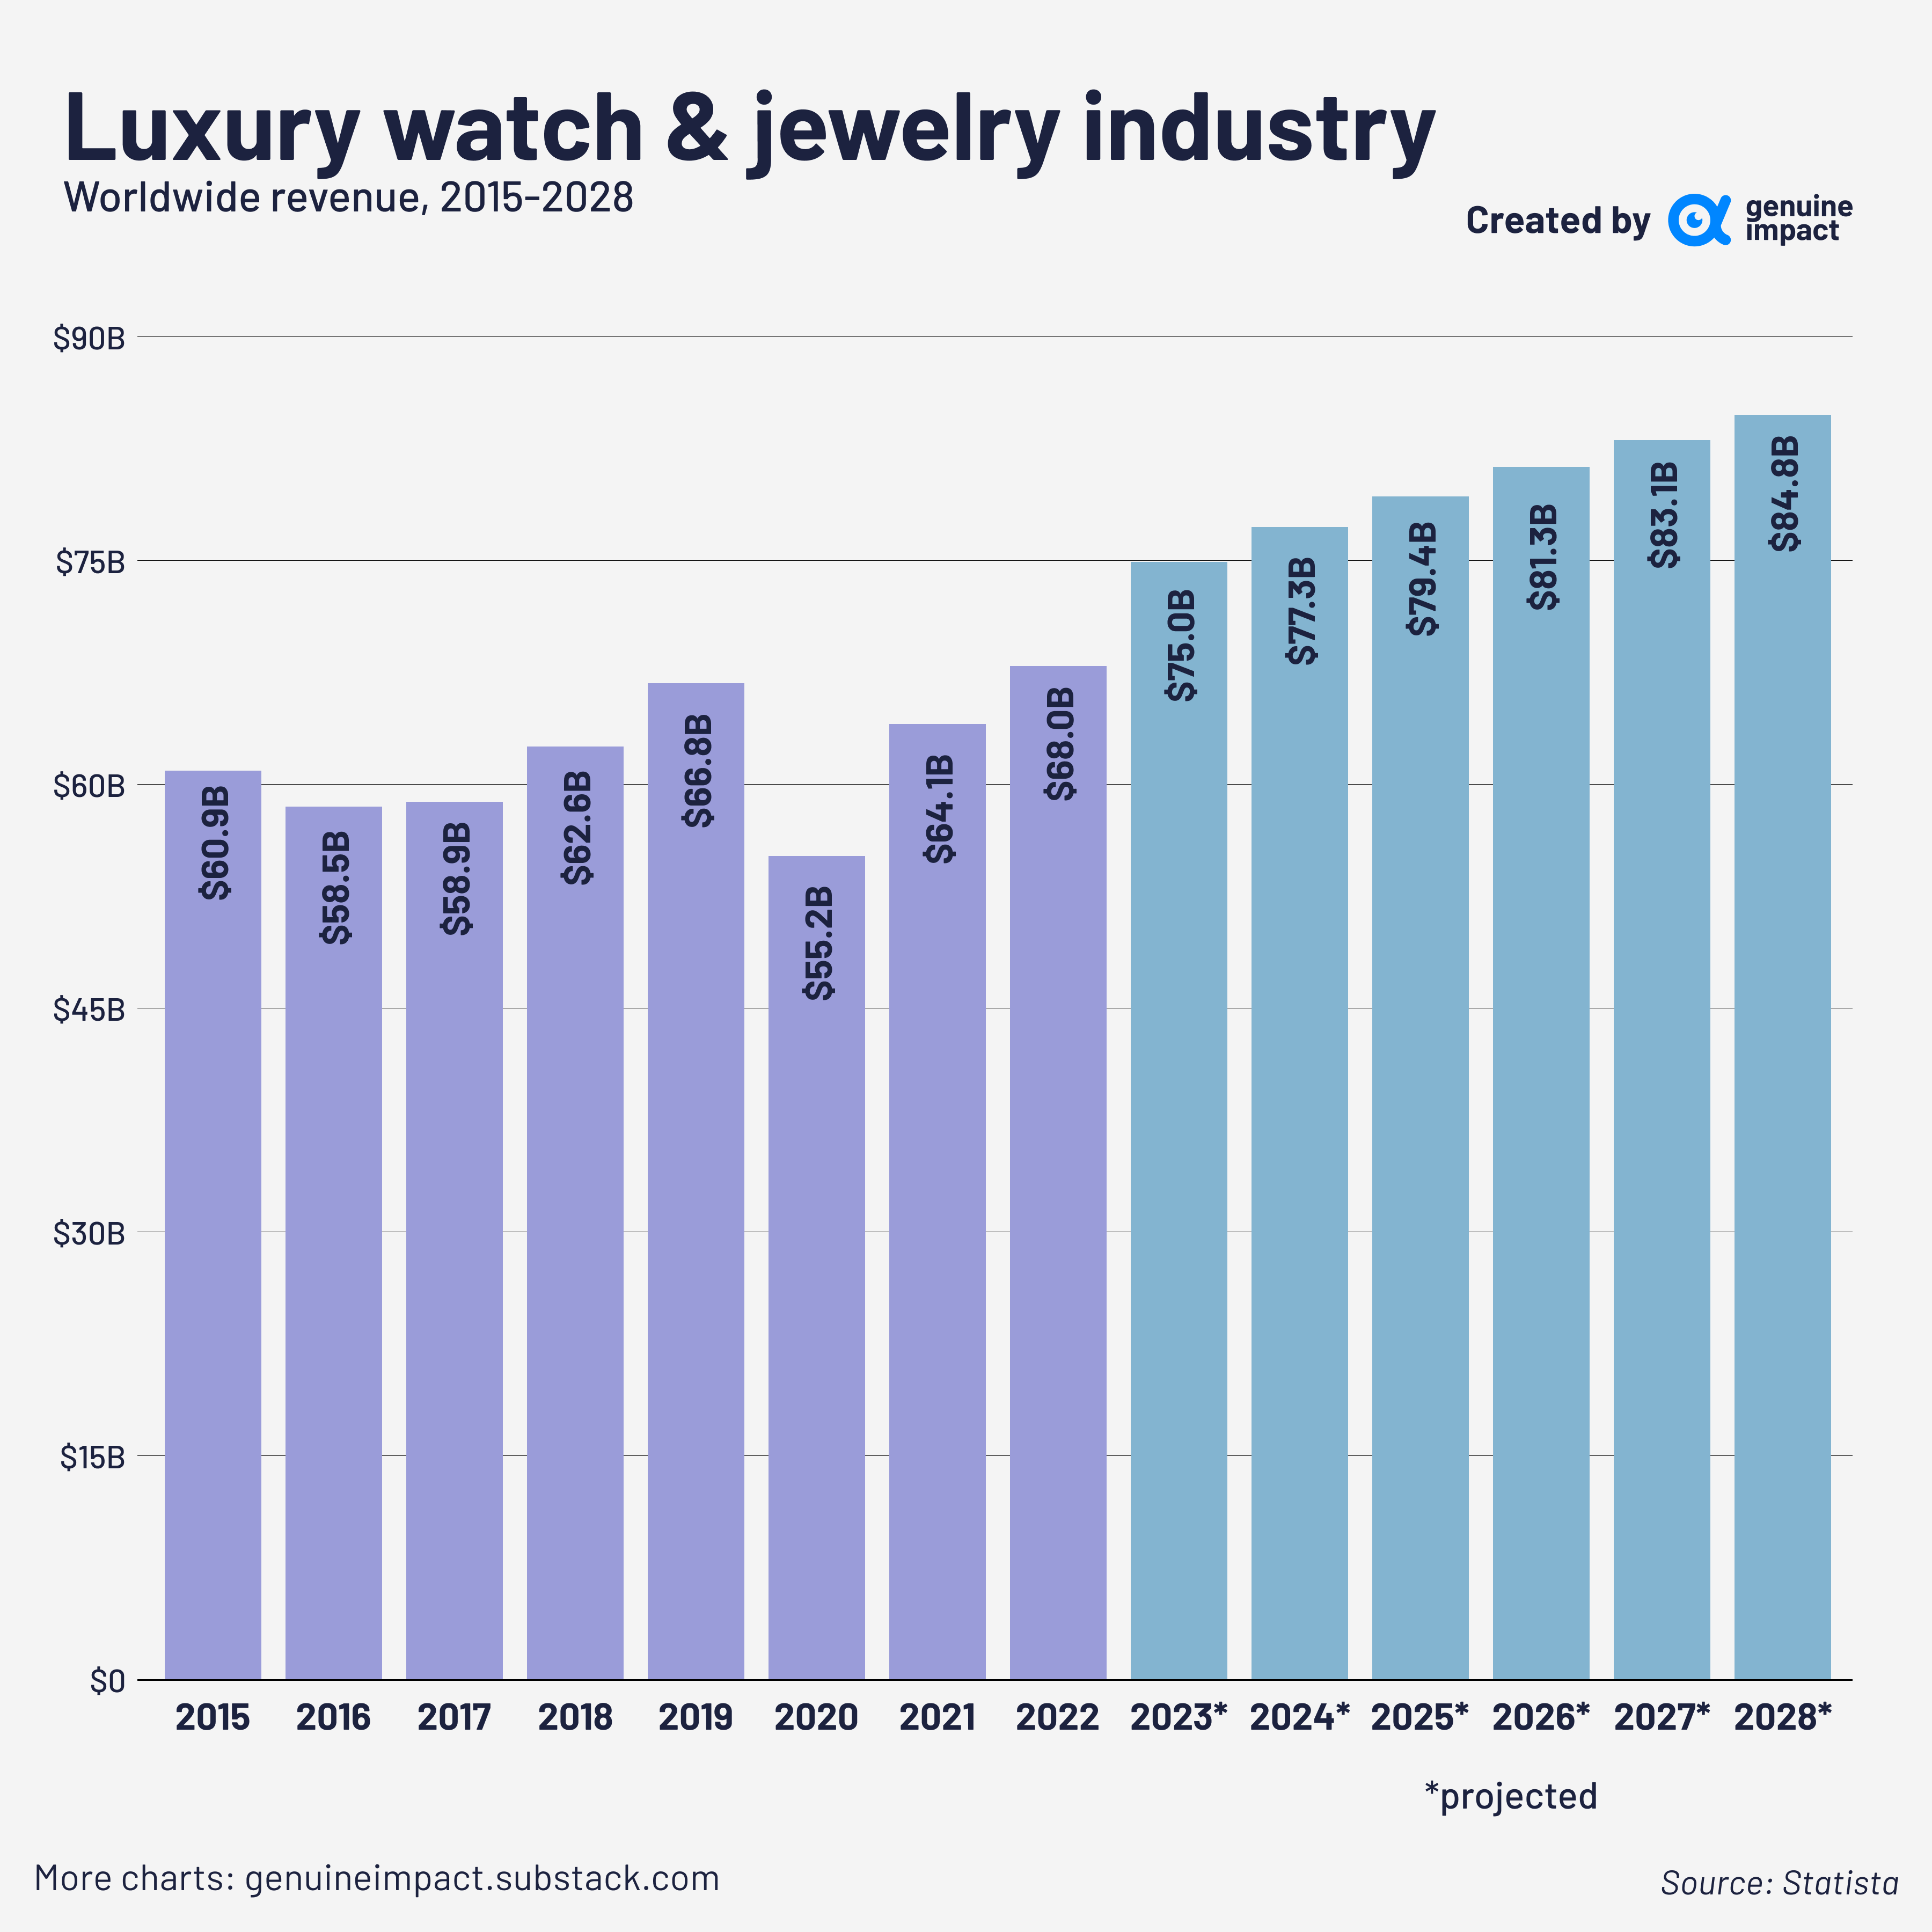 The Swatch Group, a major luxury group in watchmaking luxury industry